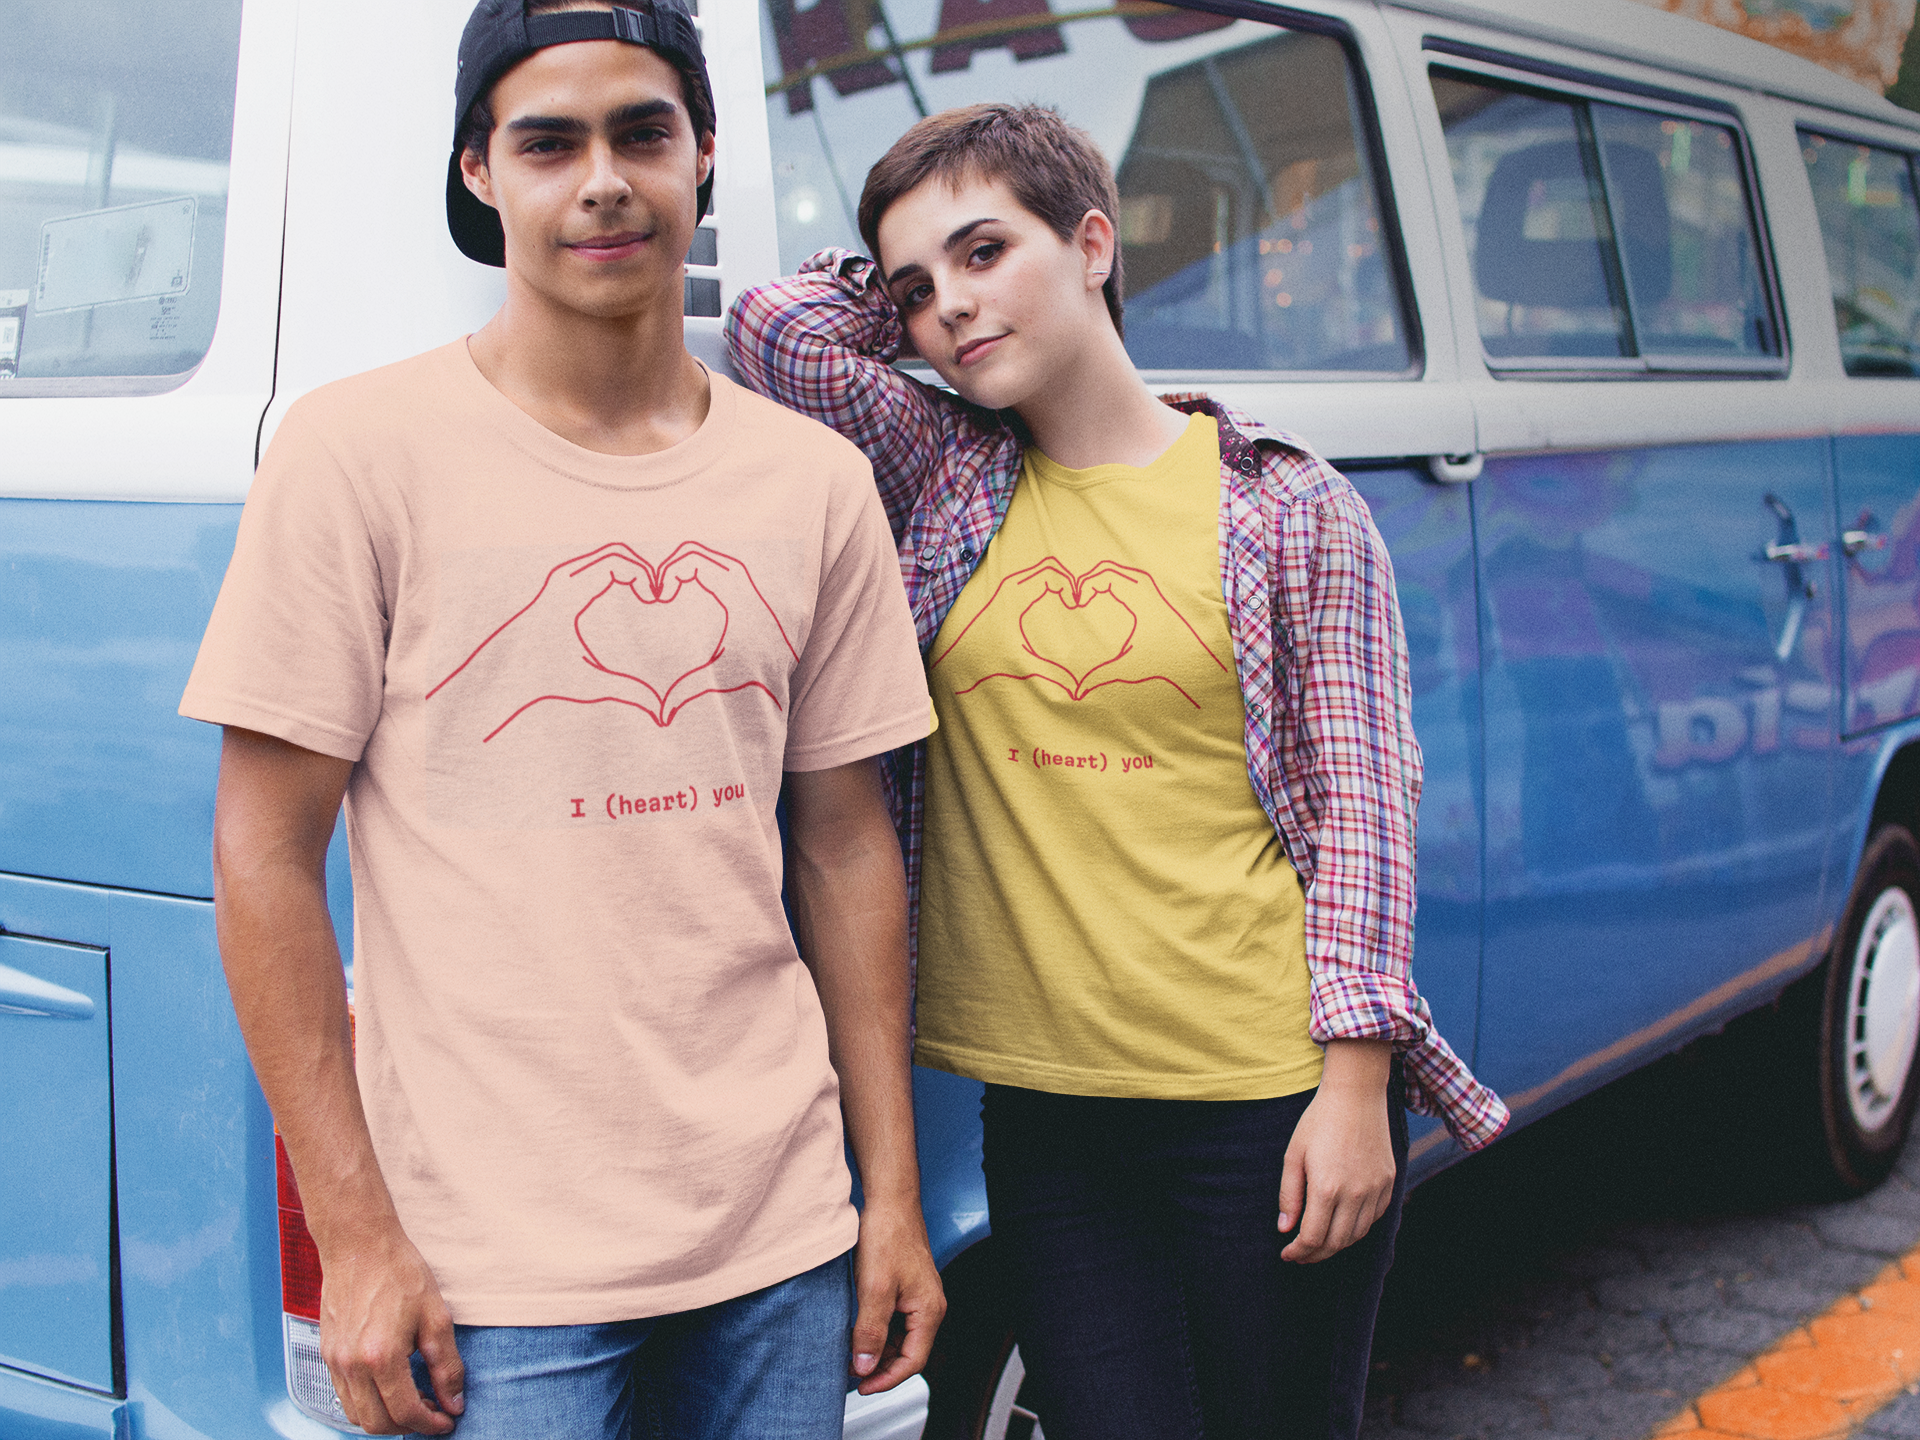 Teens standing by a funky van earing I heart you tshirts